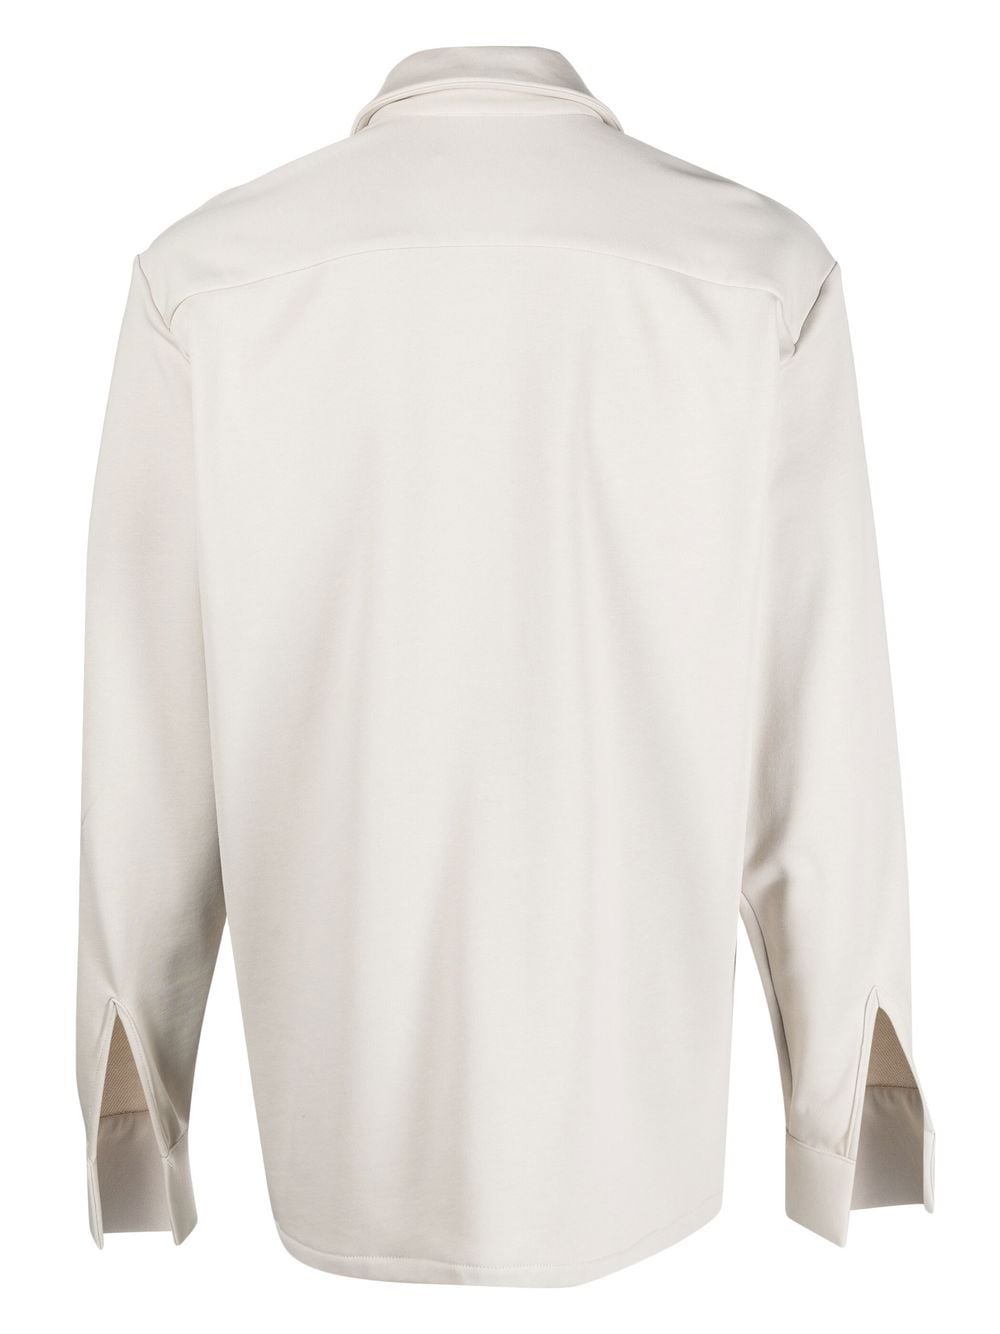 Image 2 of STYLAND x notRainProof open-front cotton shirt jacket